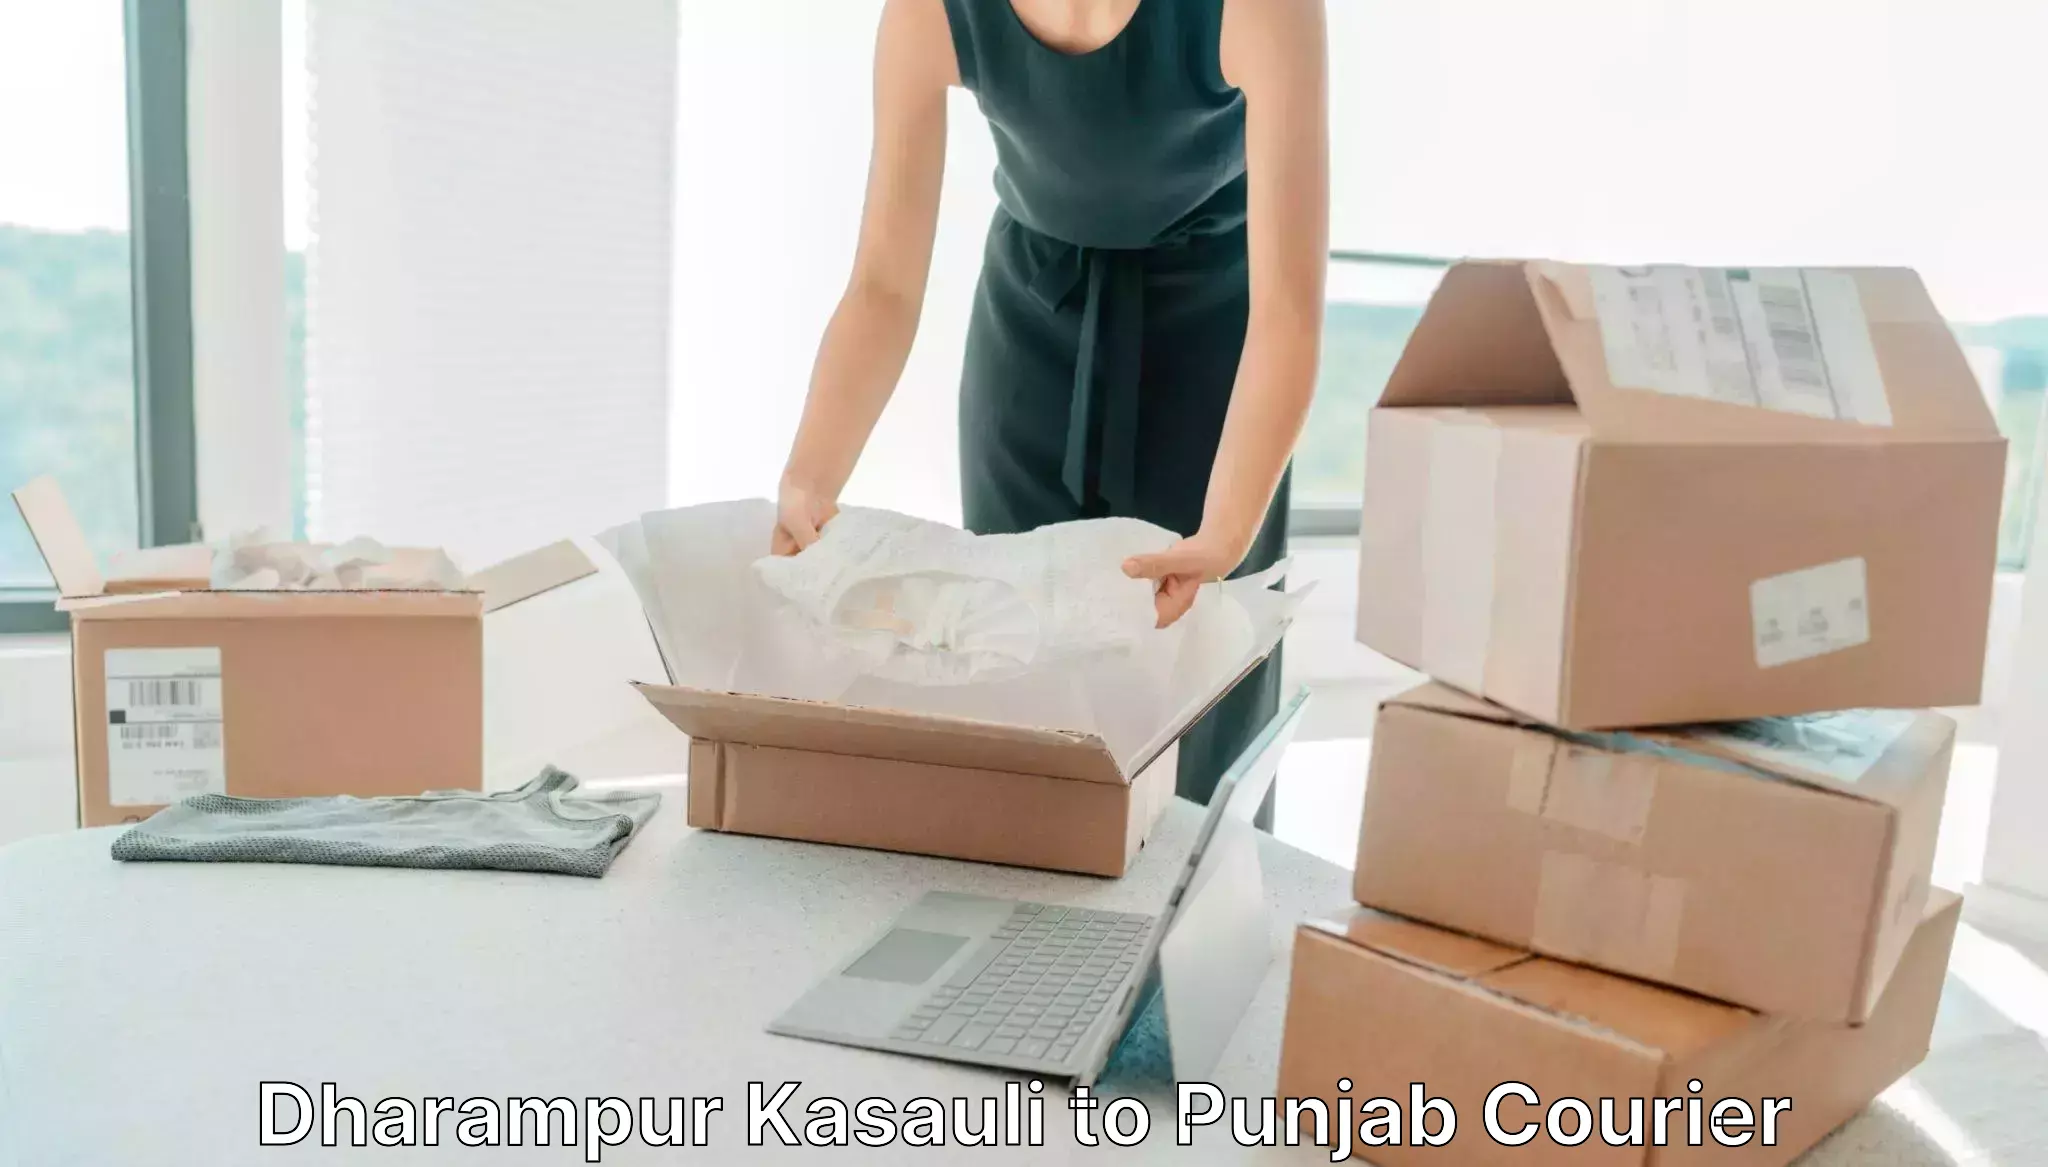 Customizable delivery plans Dharampur Kasauli to Dhuri